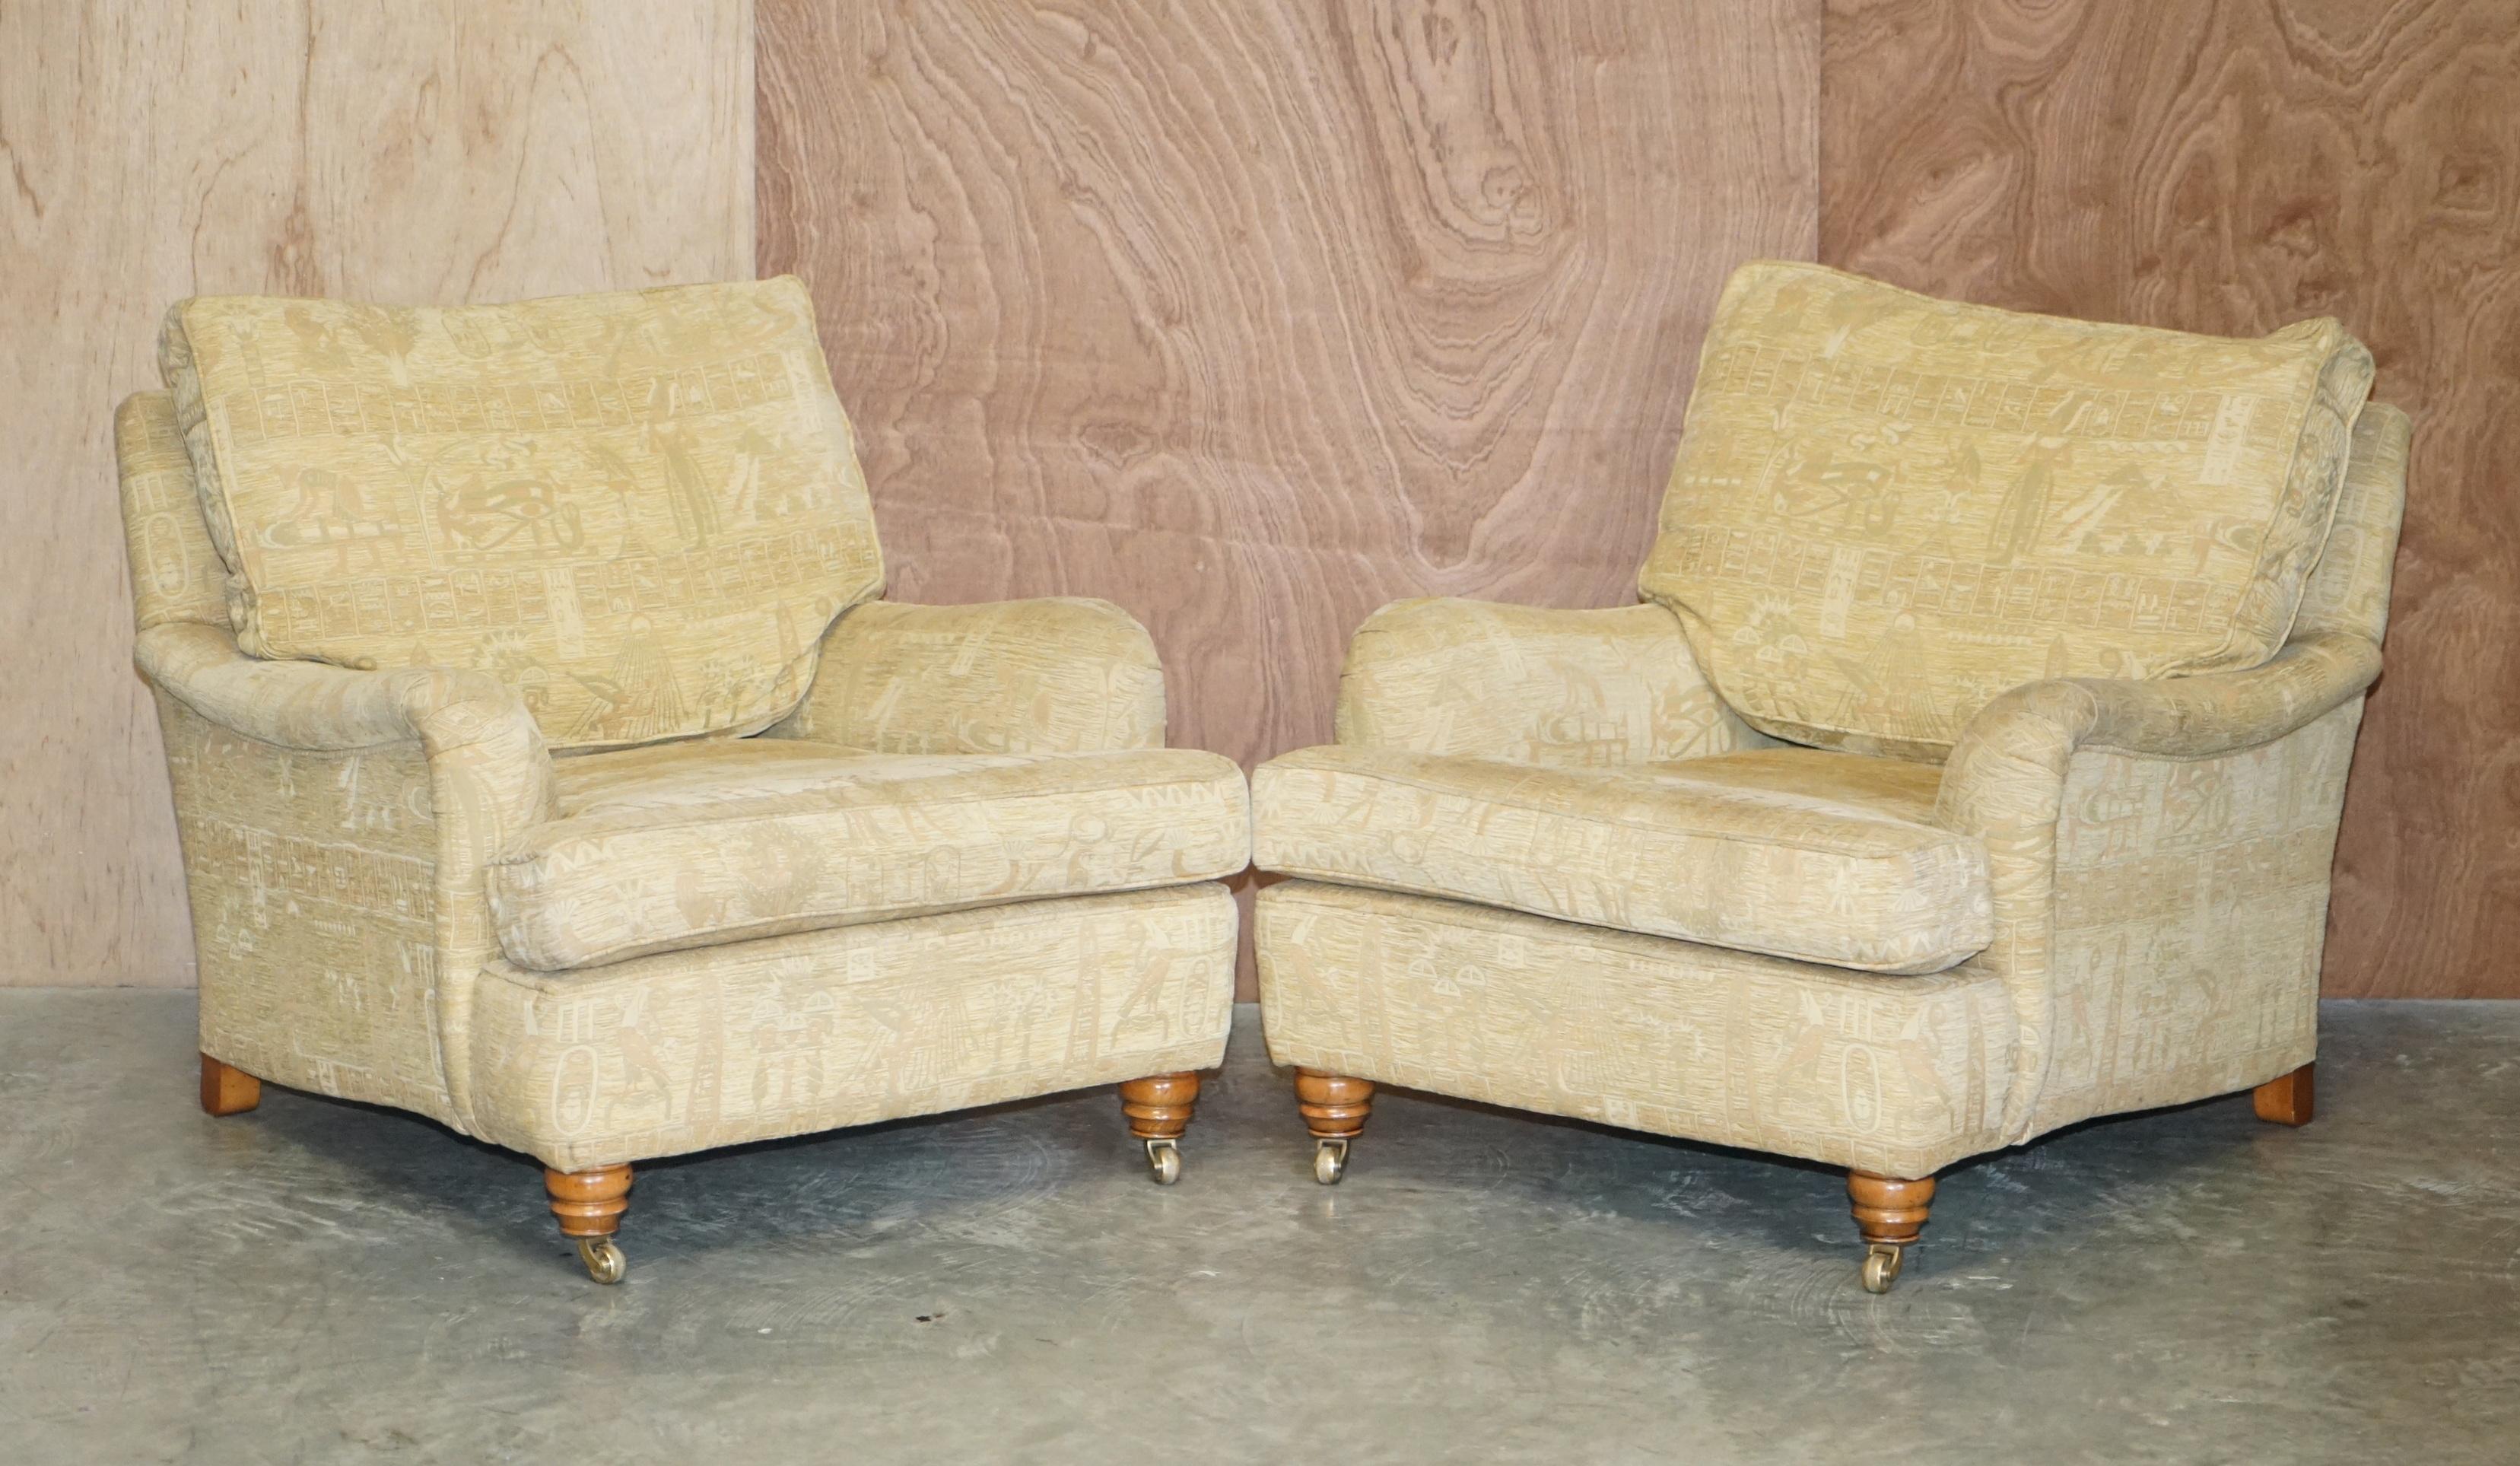 We are delighted to offer for sale this very nice Duresta Lansdowne sofa and armchair three piece suite with Egyptian style upholstery 

Please note the delivery fee listed is just a guide, it covers within the M25 only for the UK and local Europe